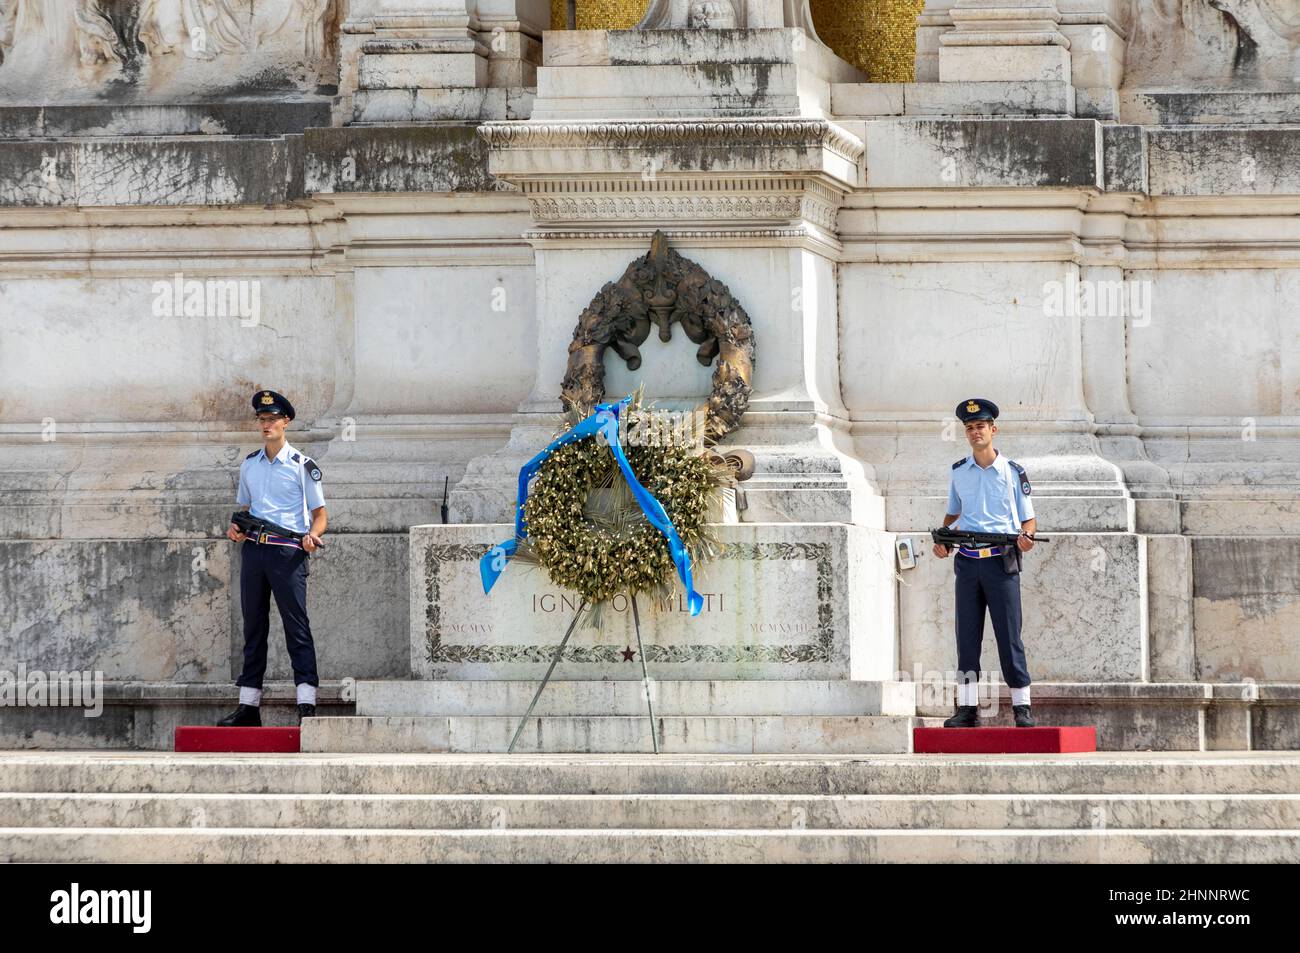 Soldiers at Victor Emmanuel II historic monument, Monumento Nazionale a Vittorio Emanuele II, on Venetian Square. Tomb of the Unknown Soldier. Stock Photo